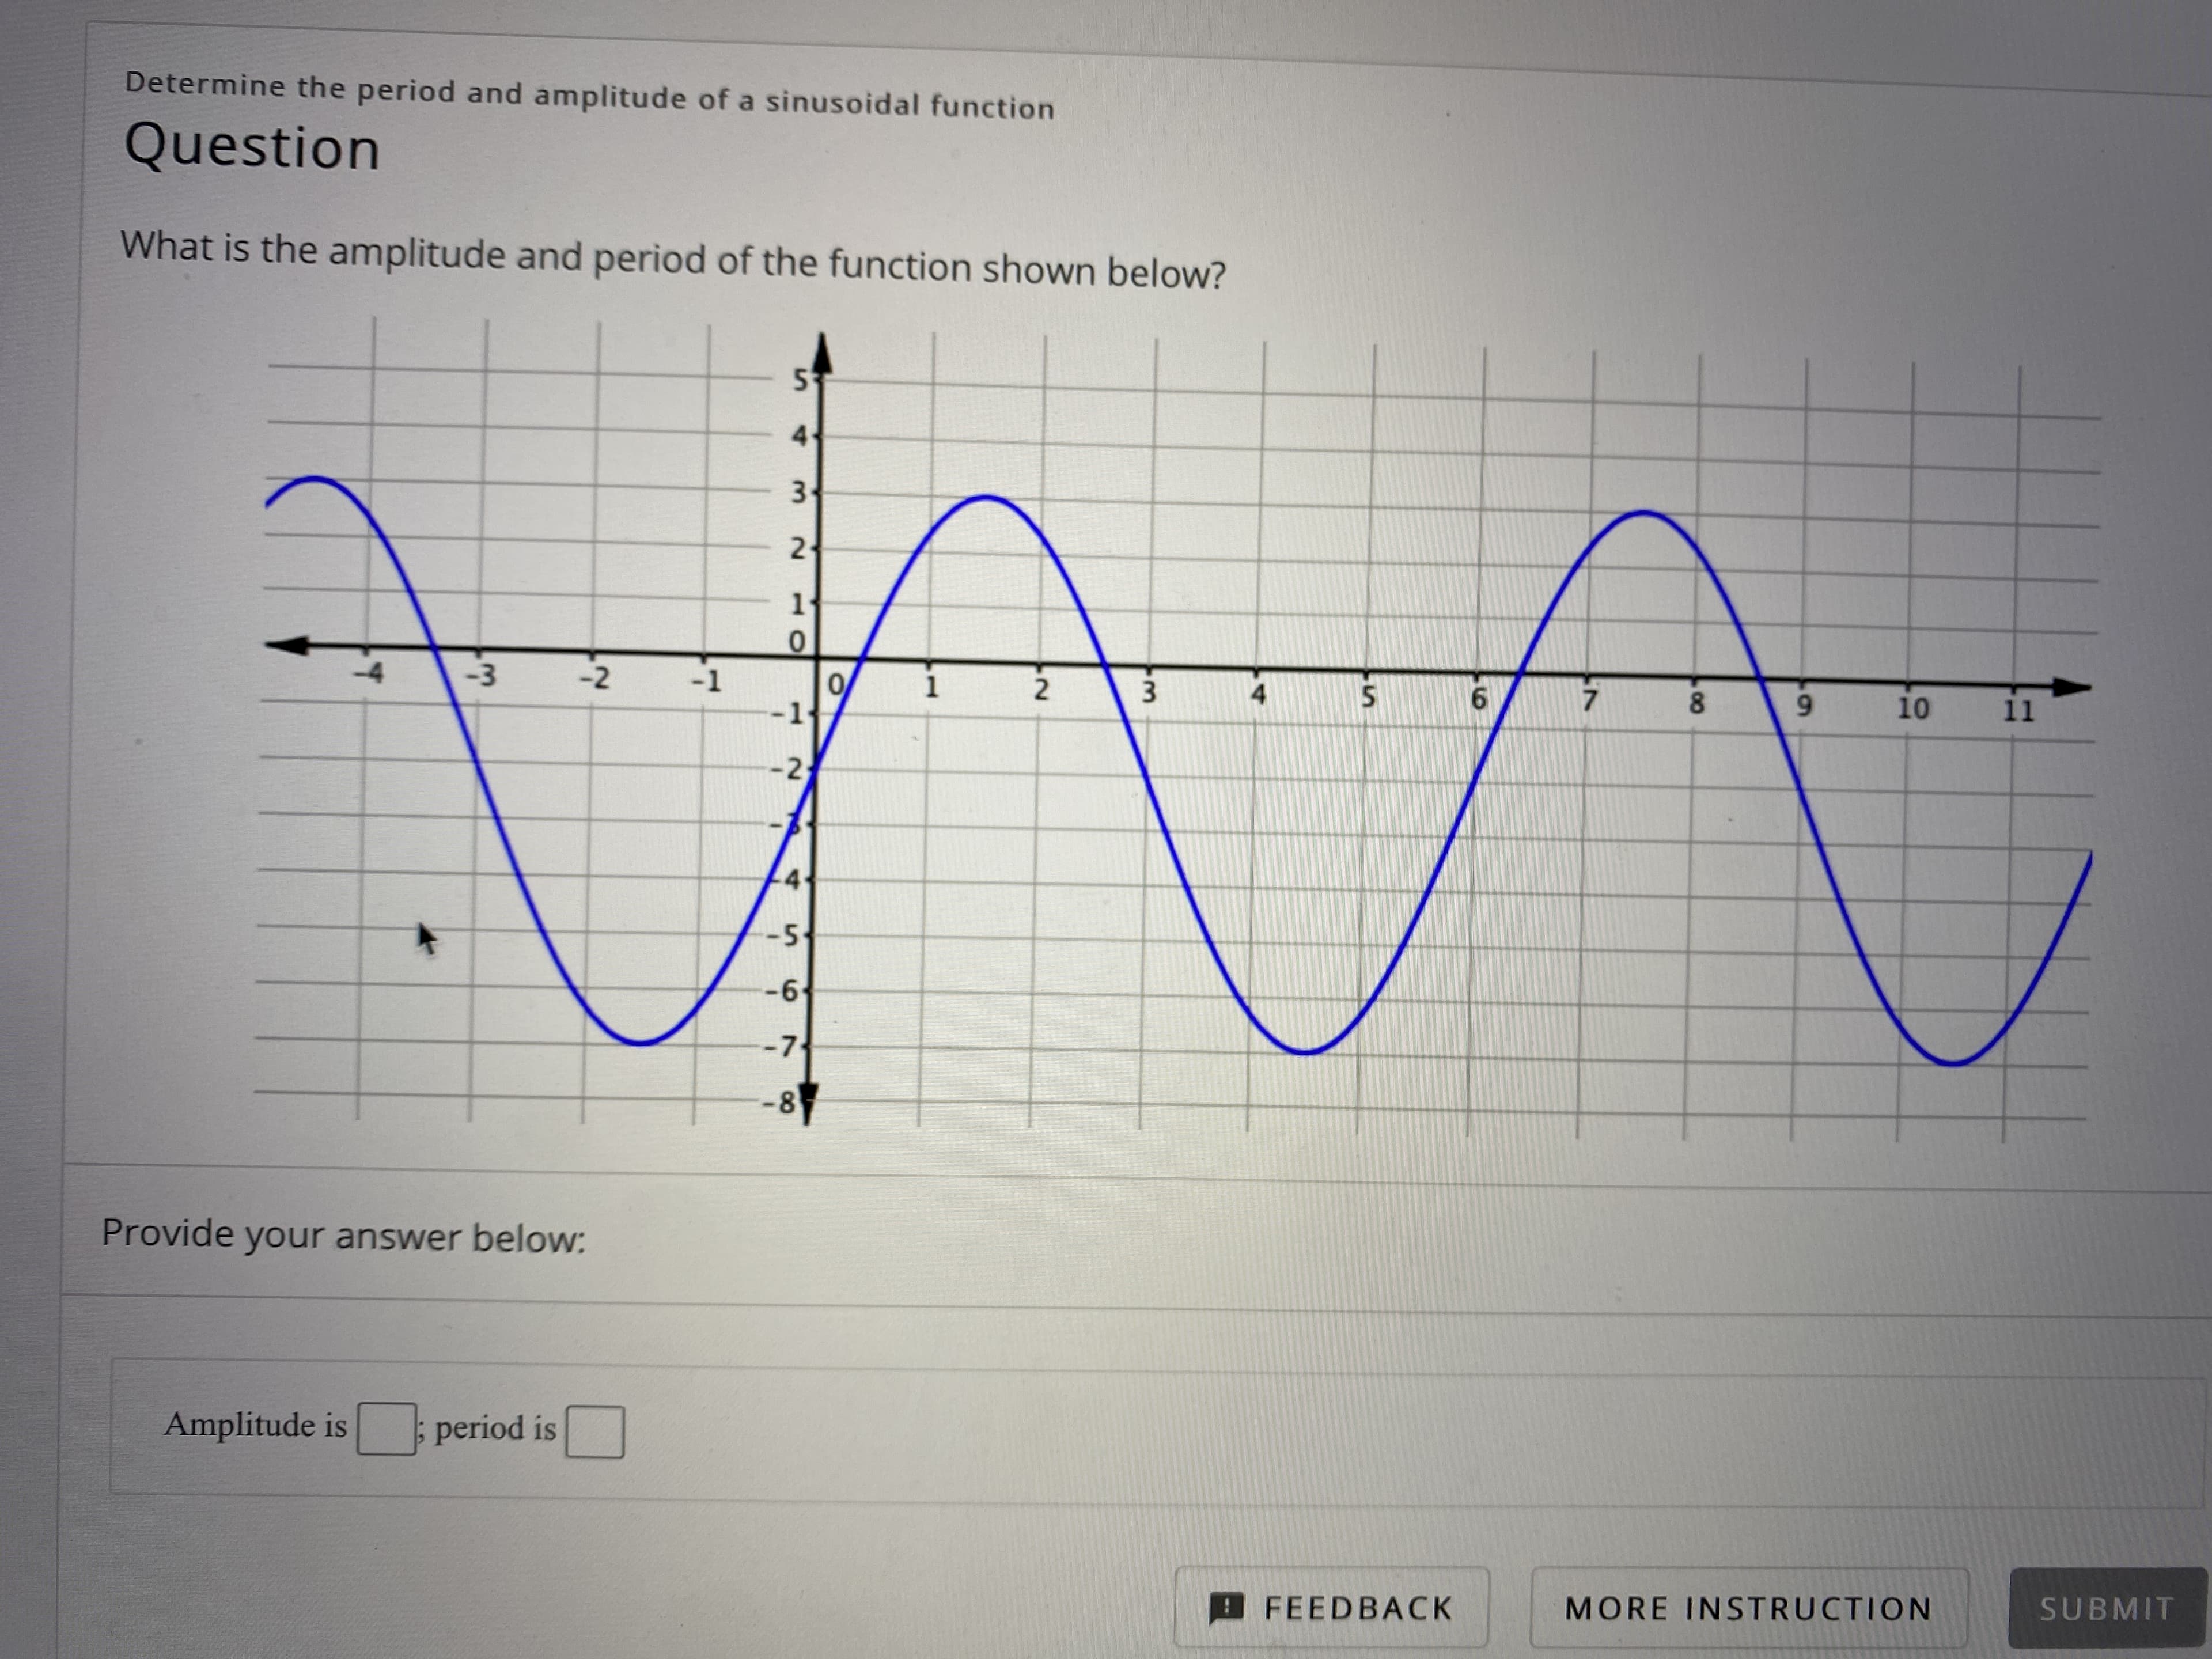 What is the amplitude and period of the function shown below?
